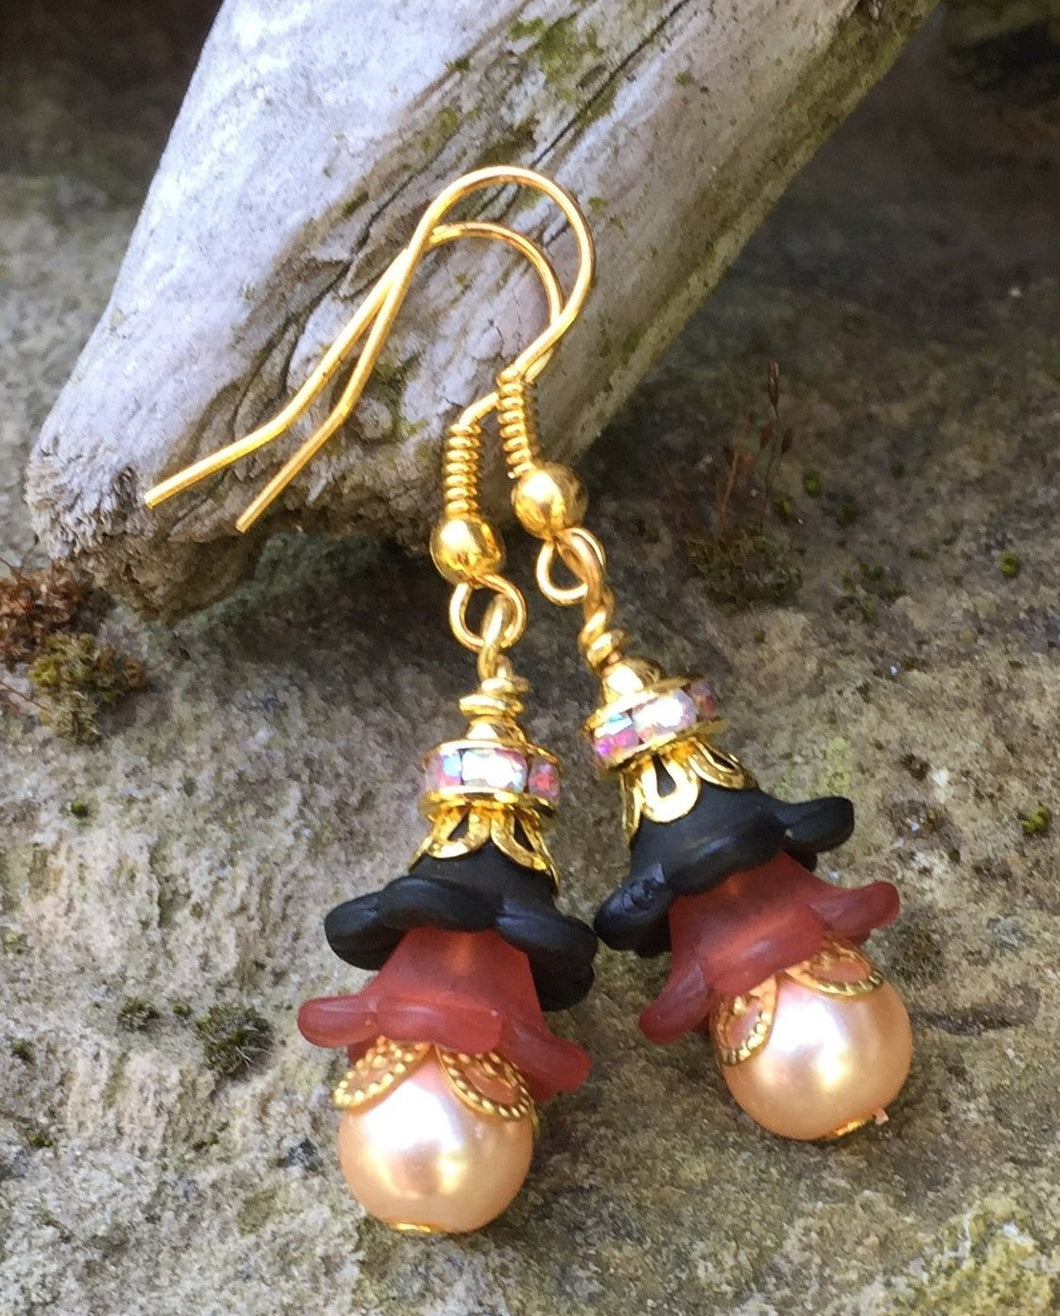 These Black, Auburn and Champagne Mini Tulip Style Earrings are adorned with gold filigree and Austrian crystals and measure 1